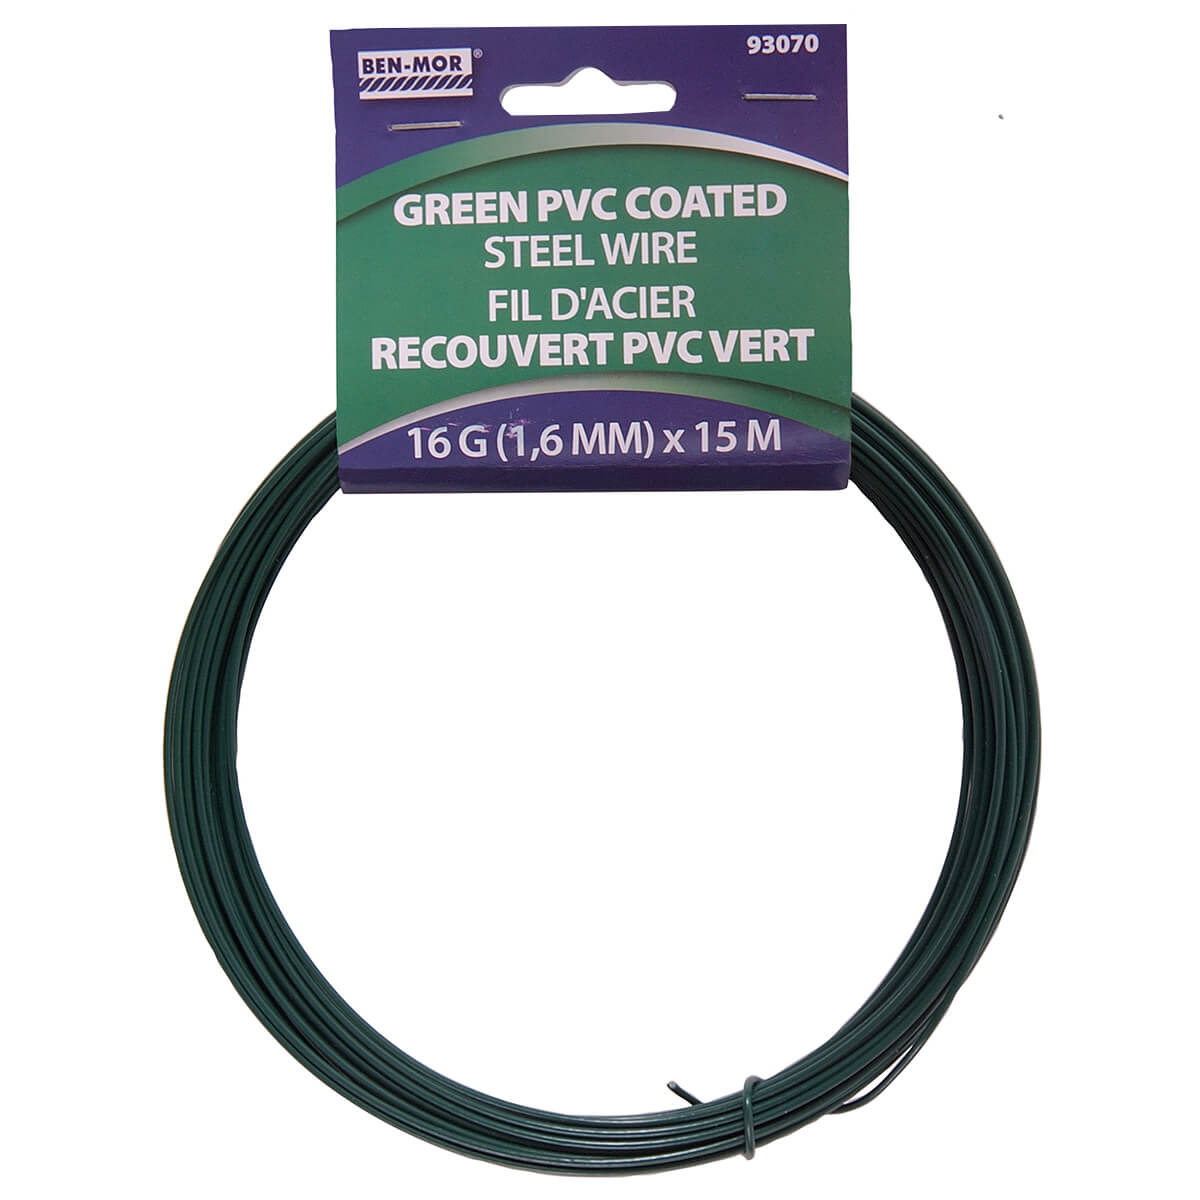 Green PVC Coated Steel Wire